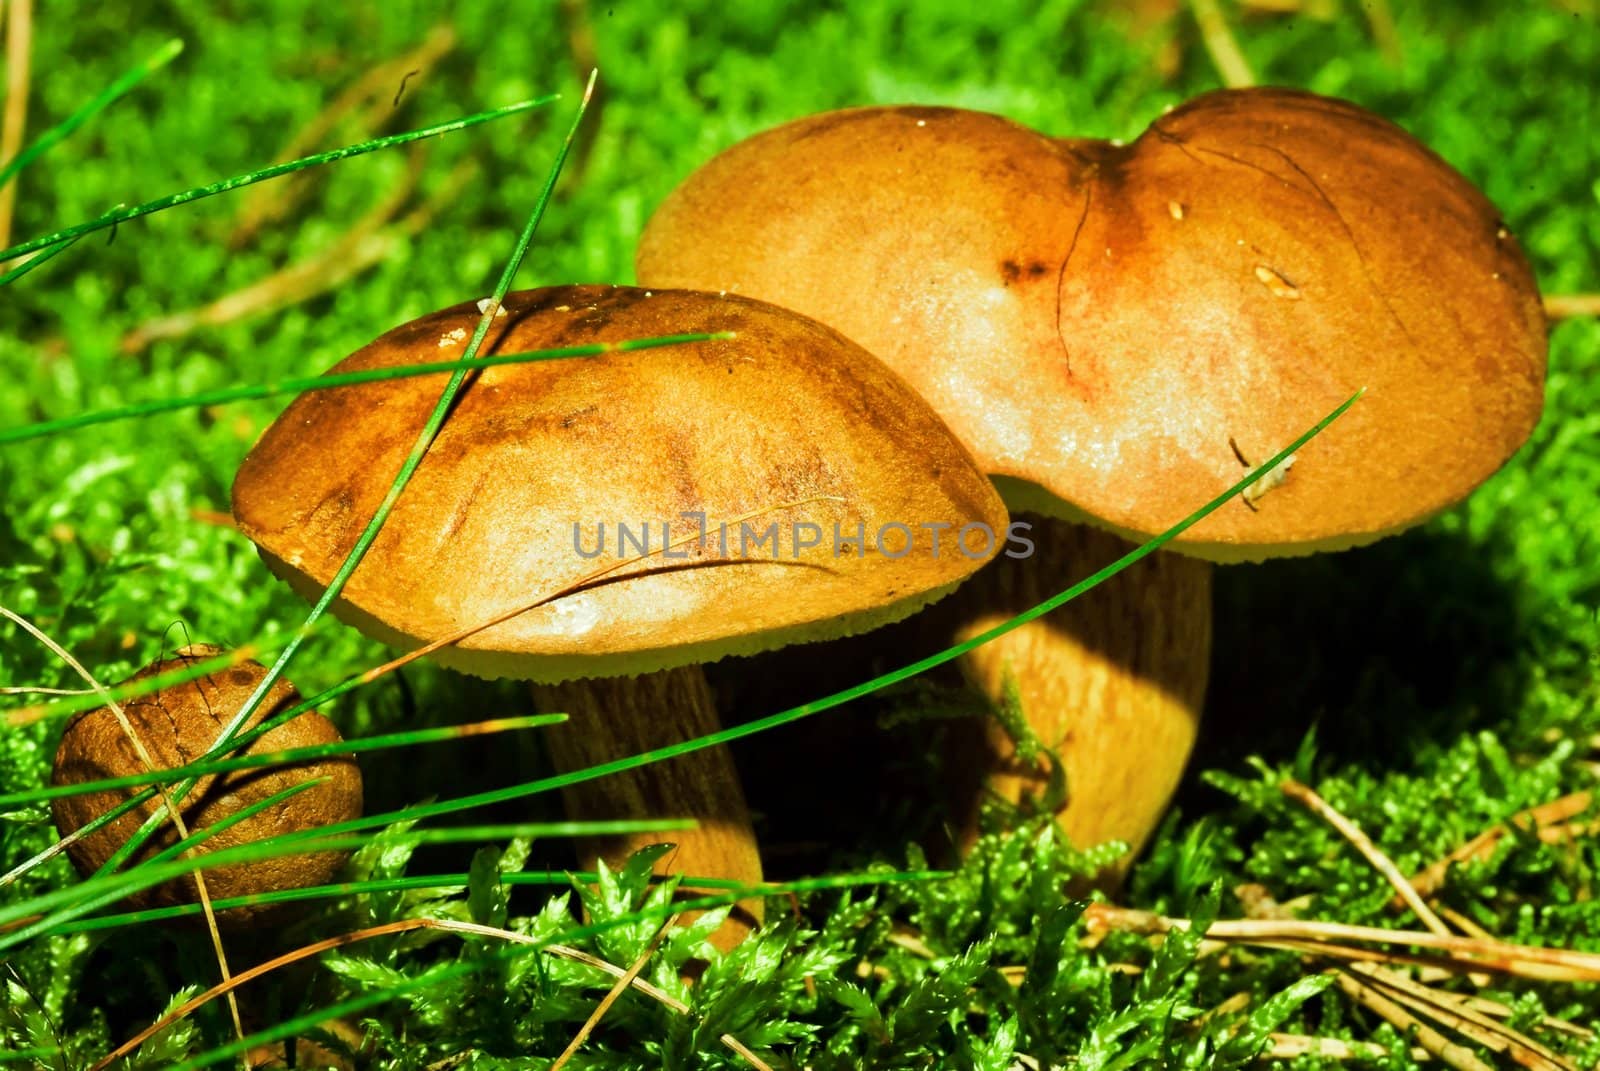 close-up view of large mushrooms on green juicy moss area in bright sunlight.